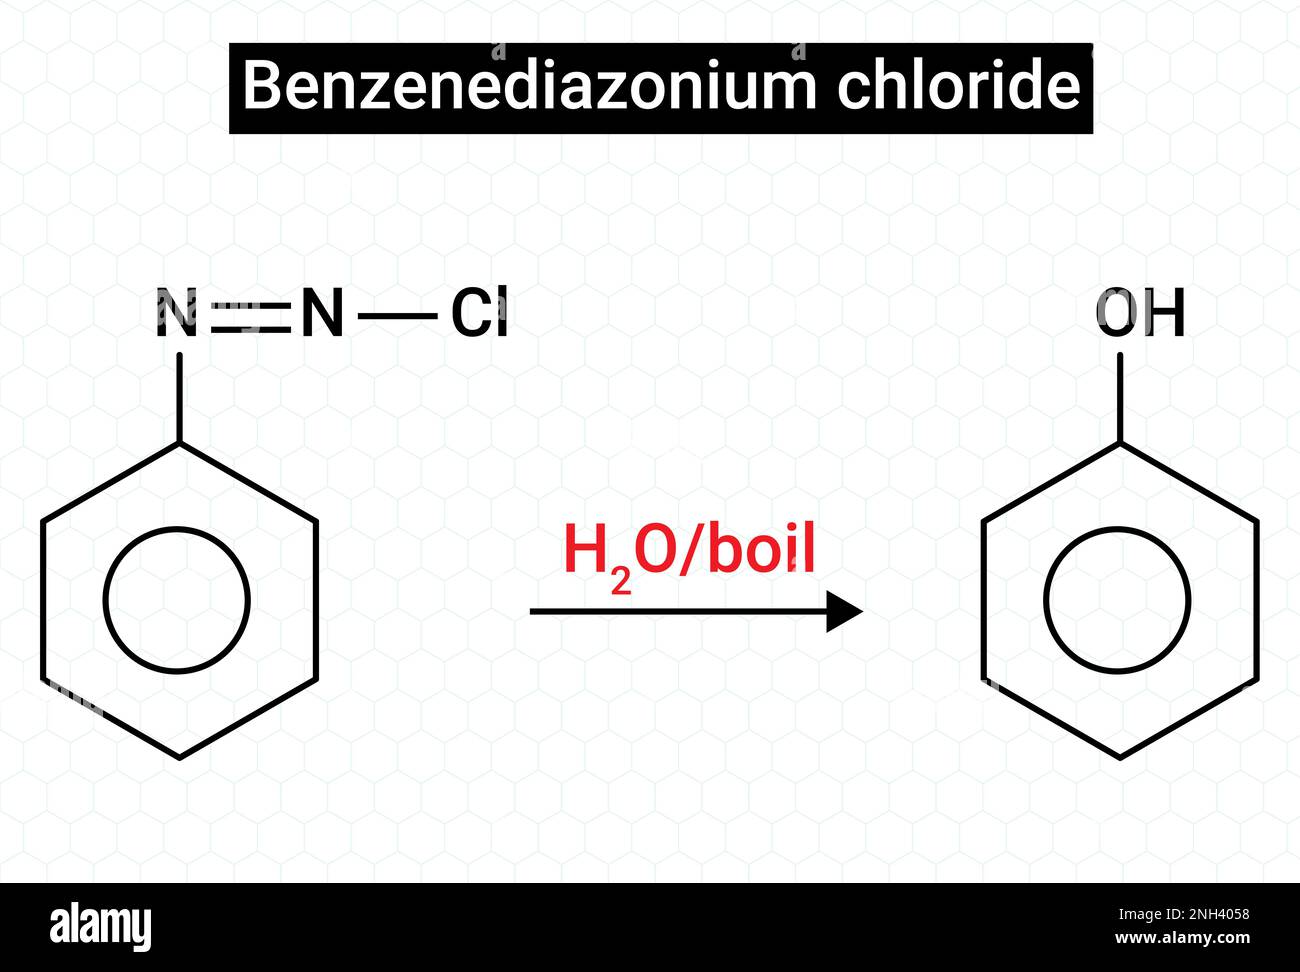 Benzenediazonium chloride can be converted into phenol by treating it with H2O, heat Stock Vector